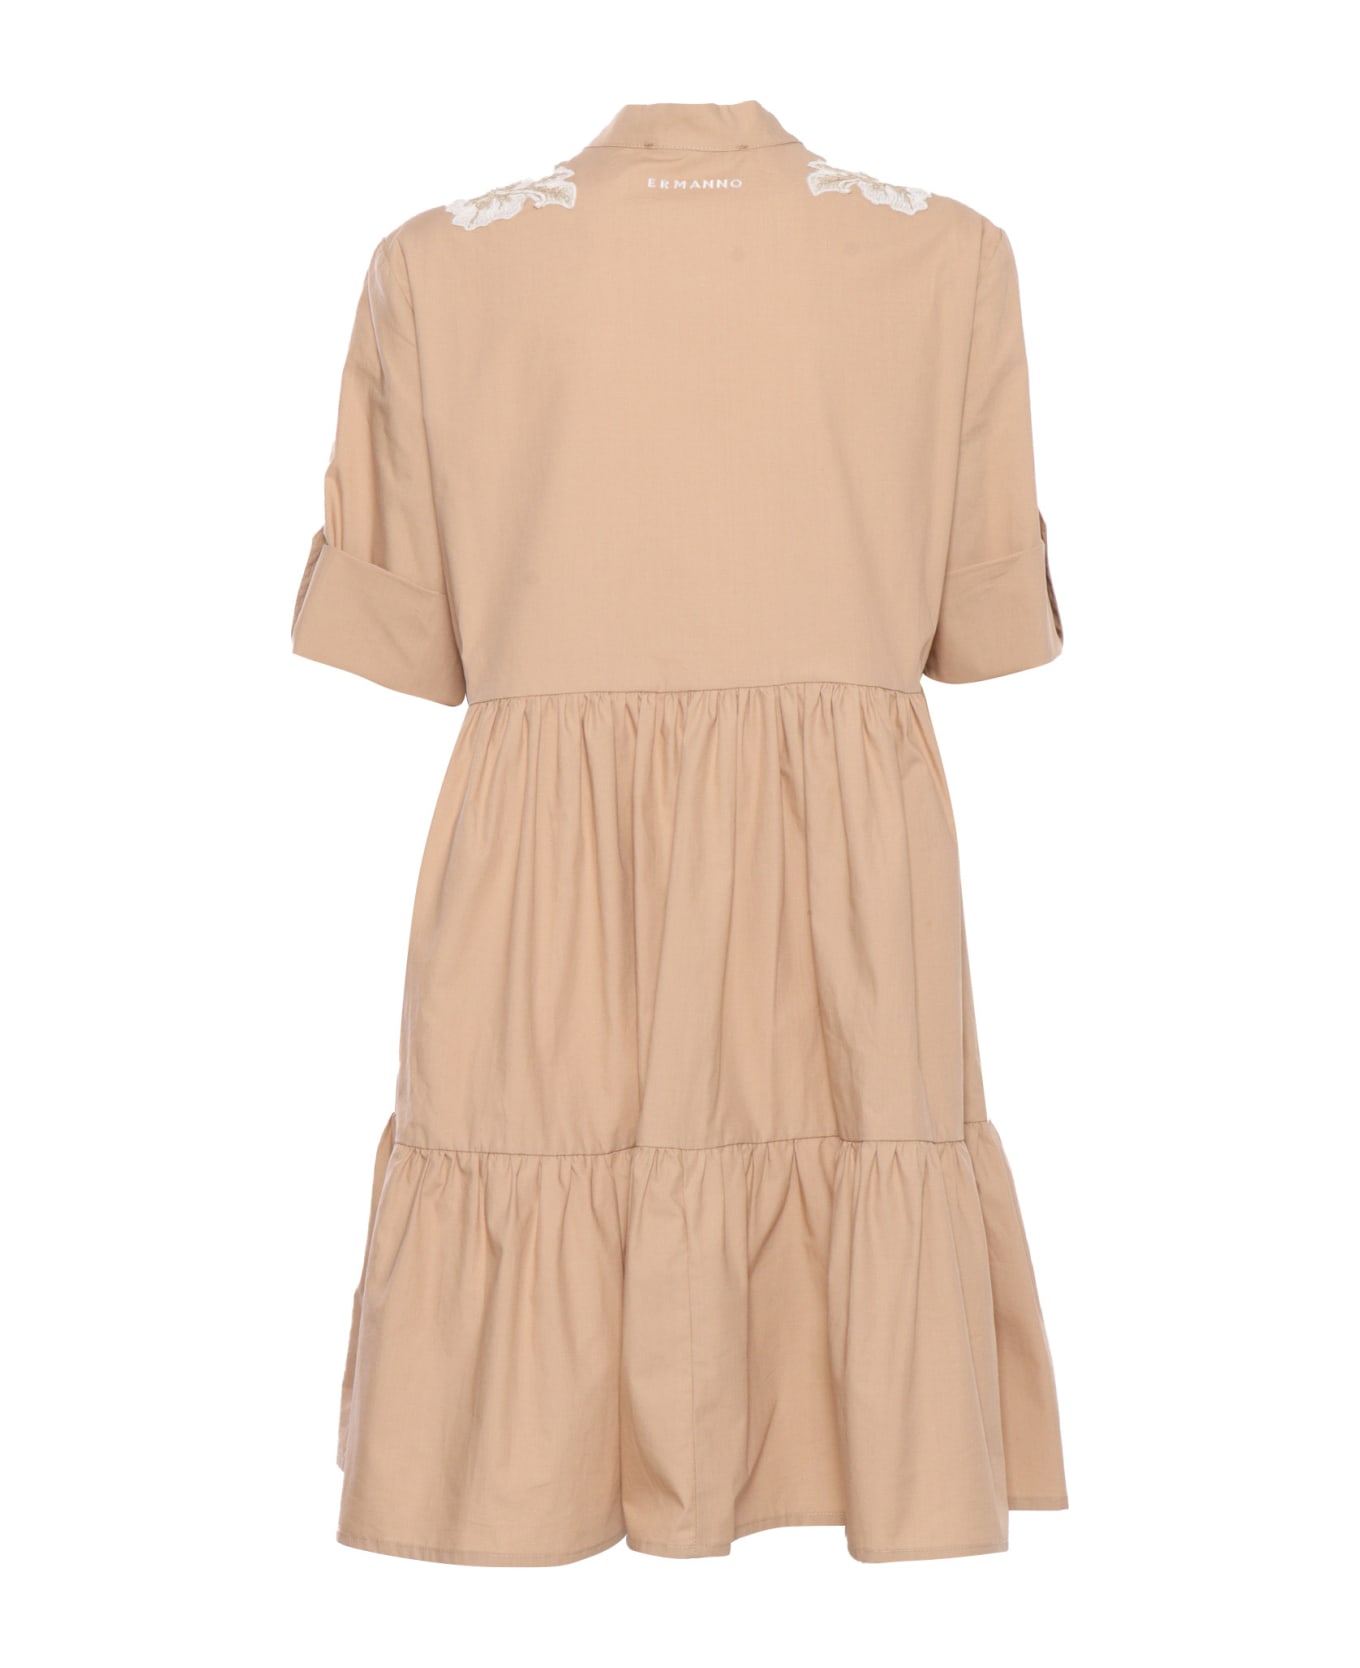 Ermanno Ermanno Scervino Dress With Lace - BROWN